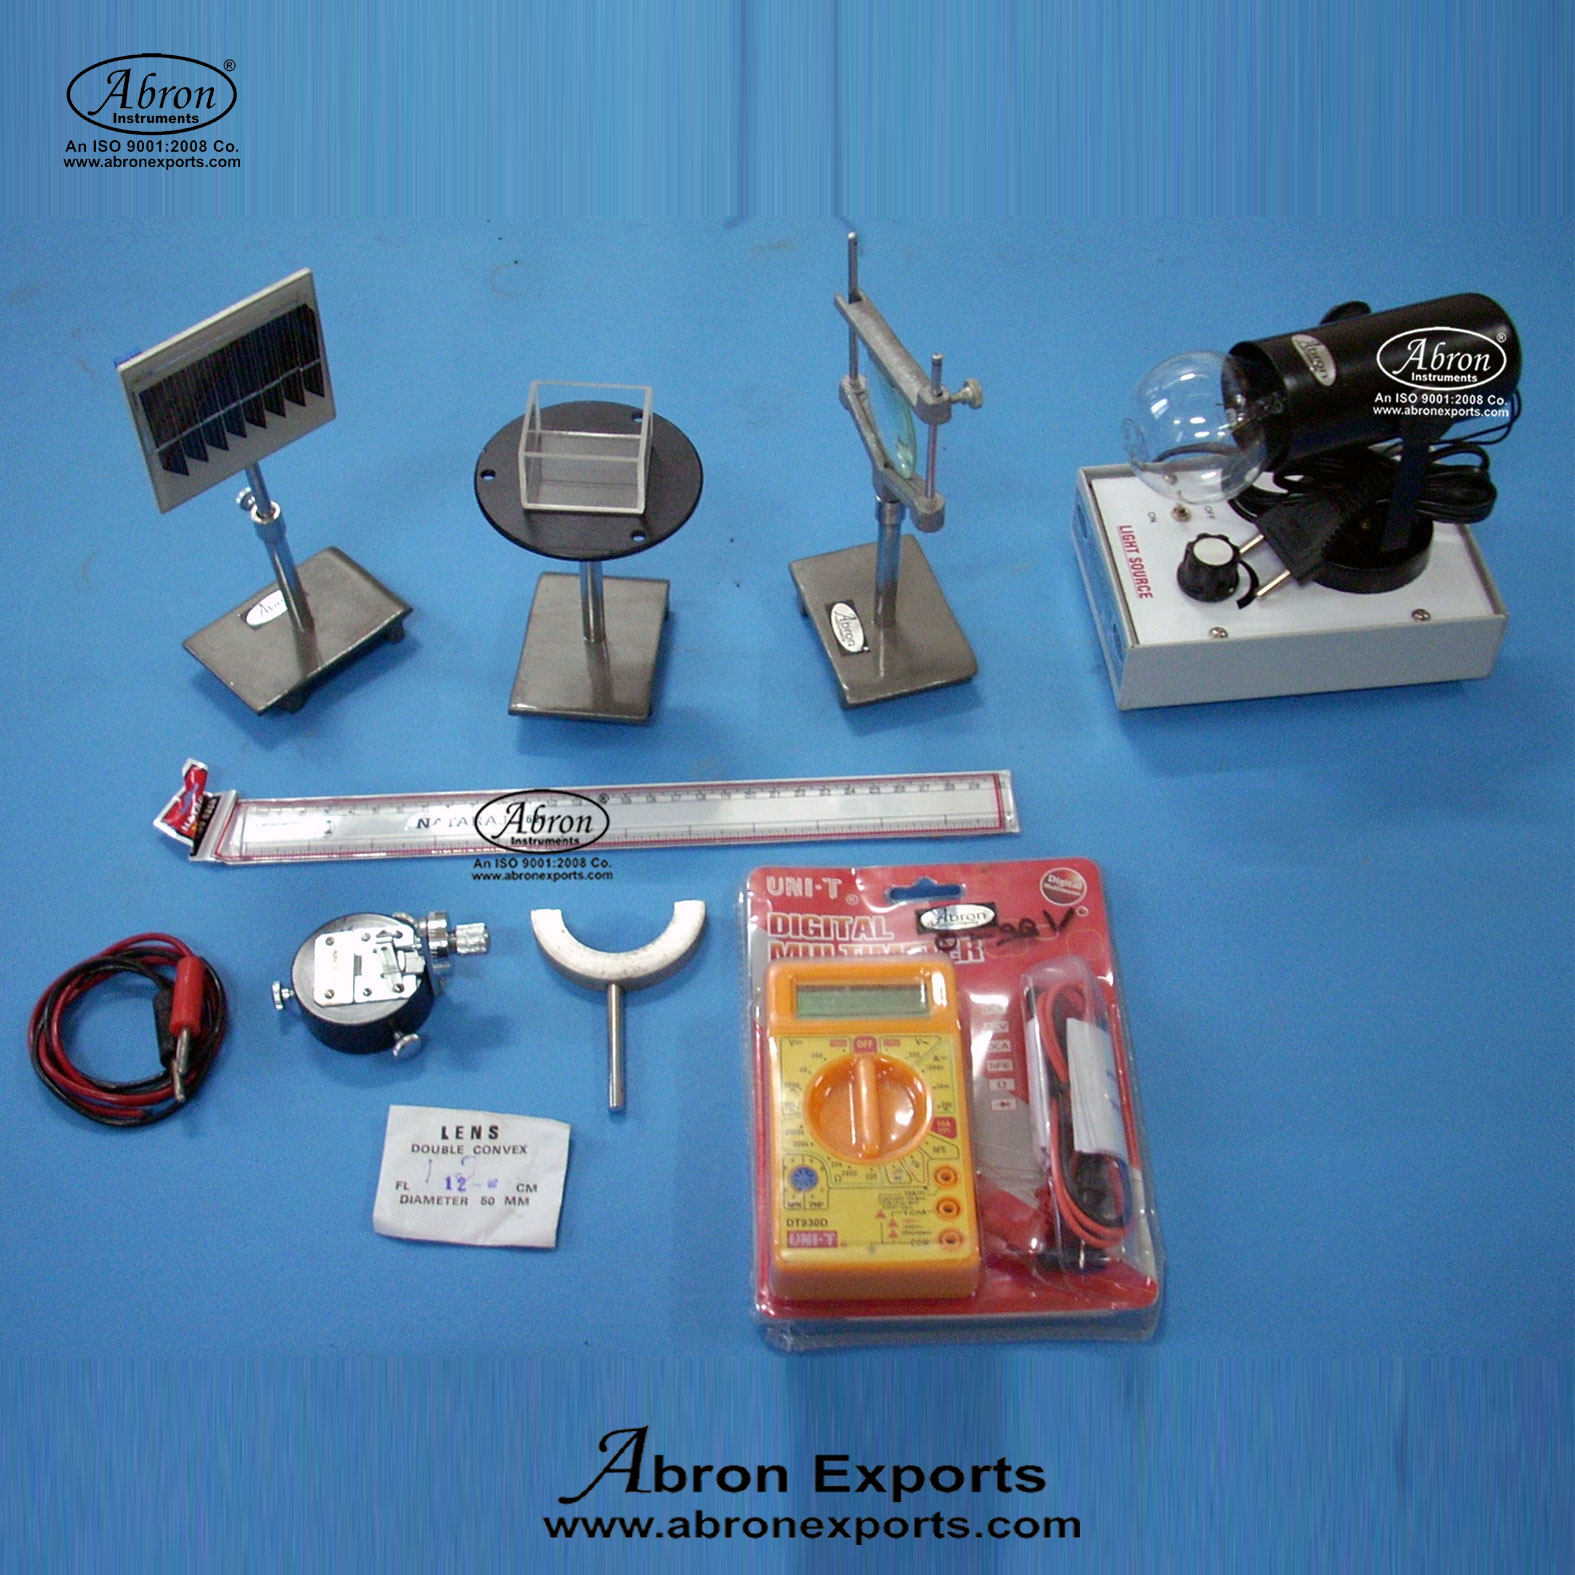 Planks constant apparatus through liquid with filter photo cell lamp house digital multimeter trainer abron AE-1372H